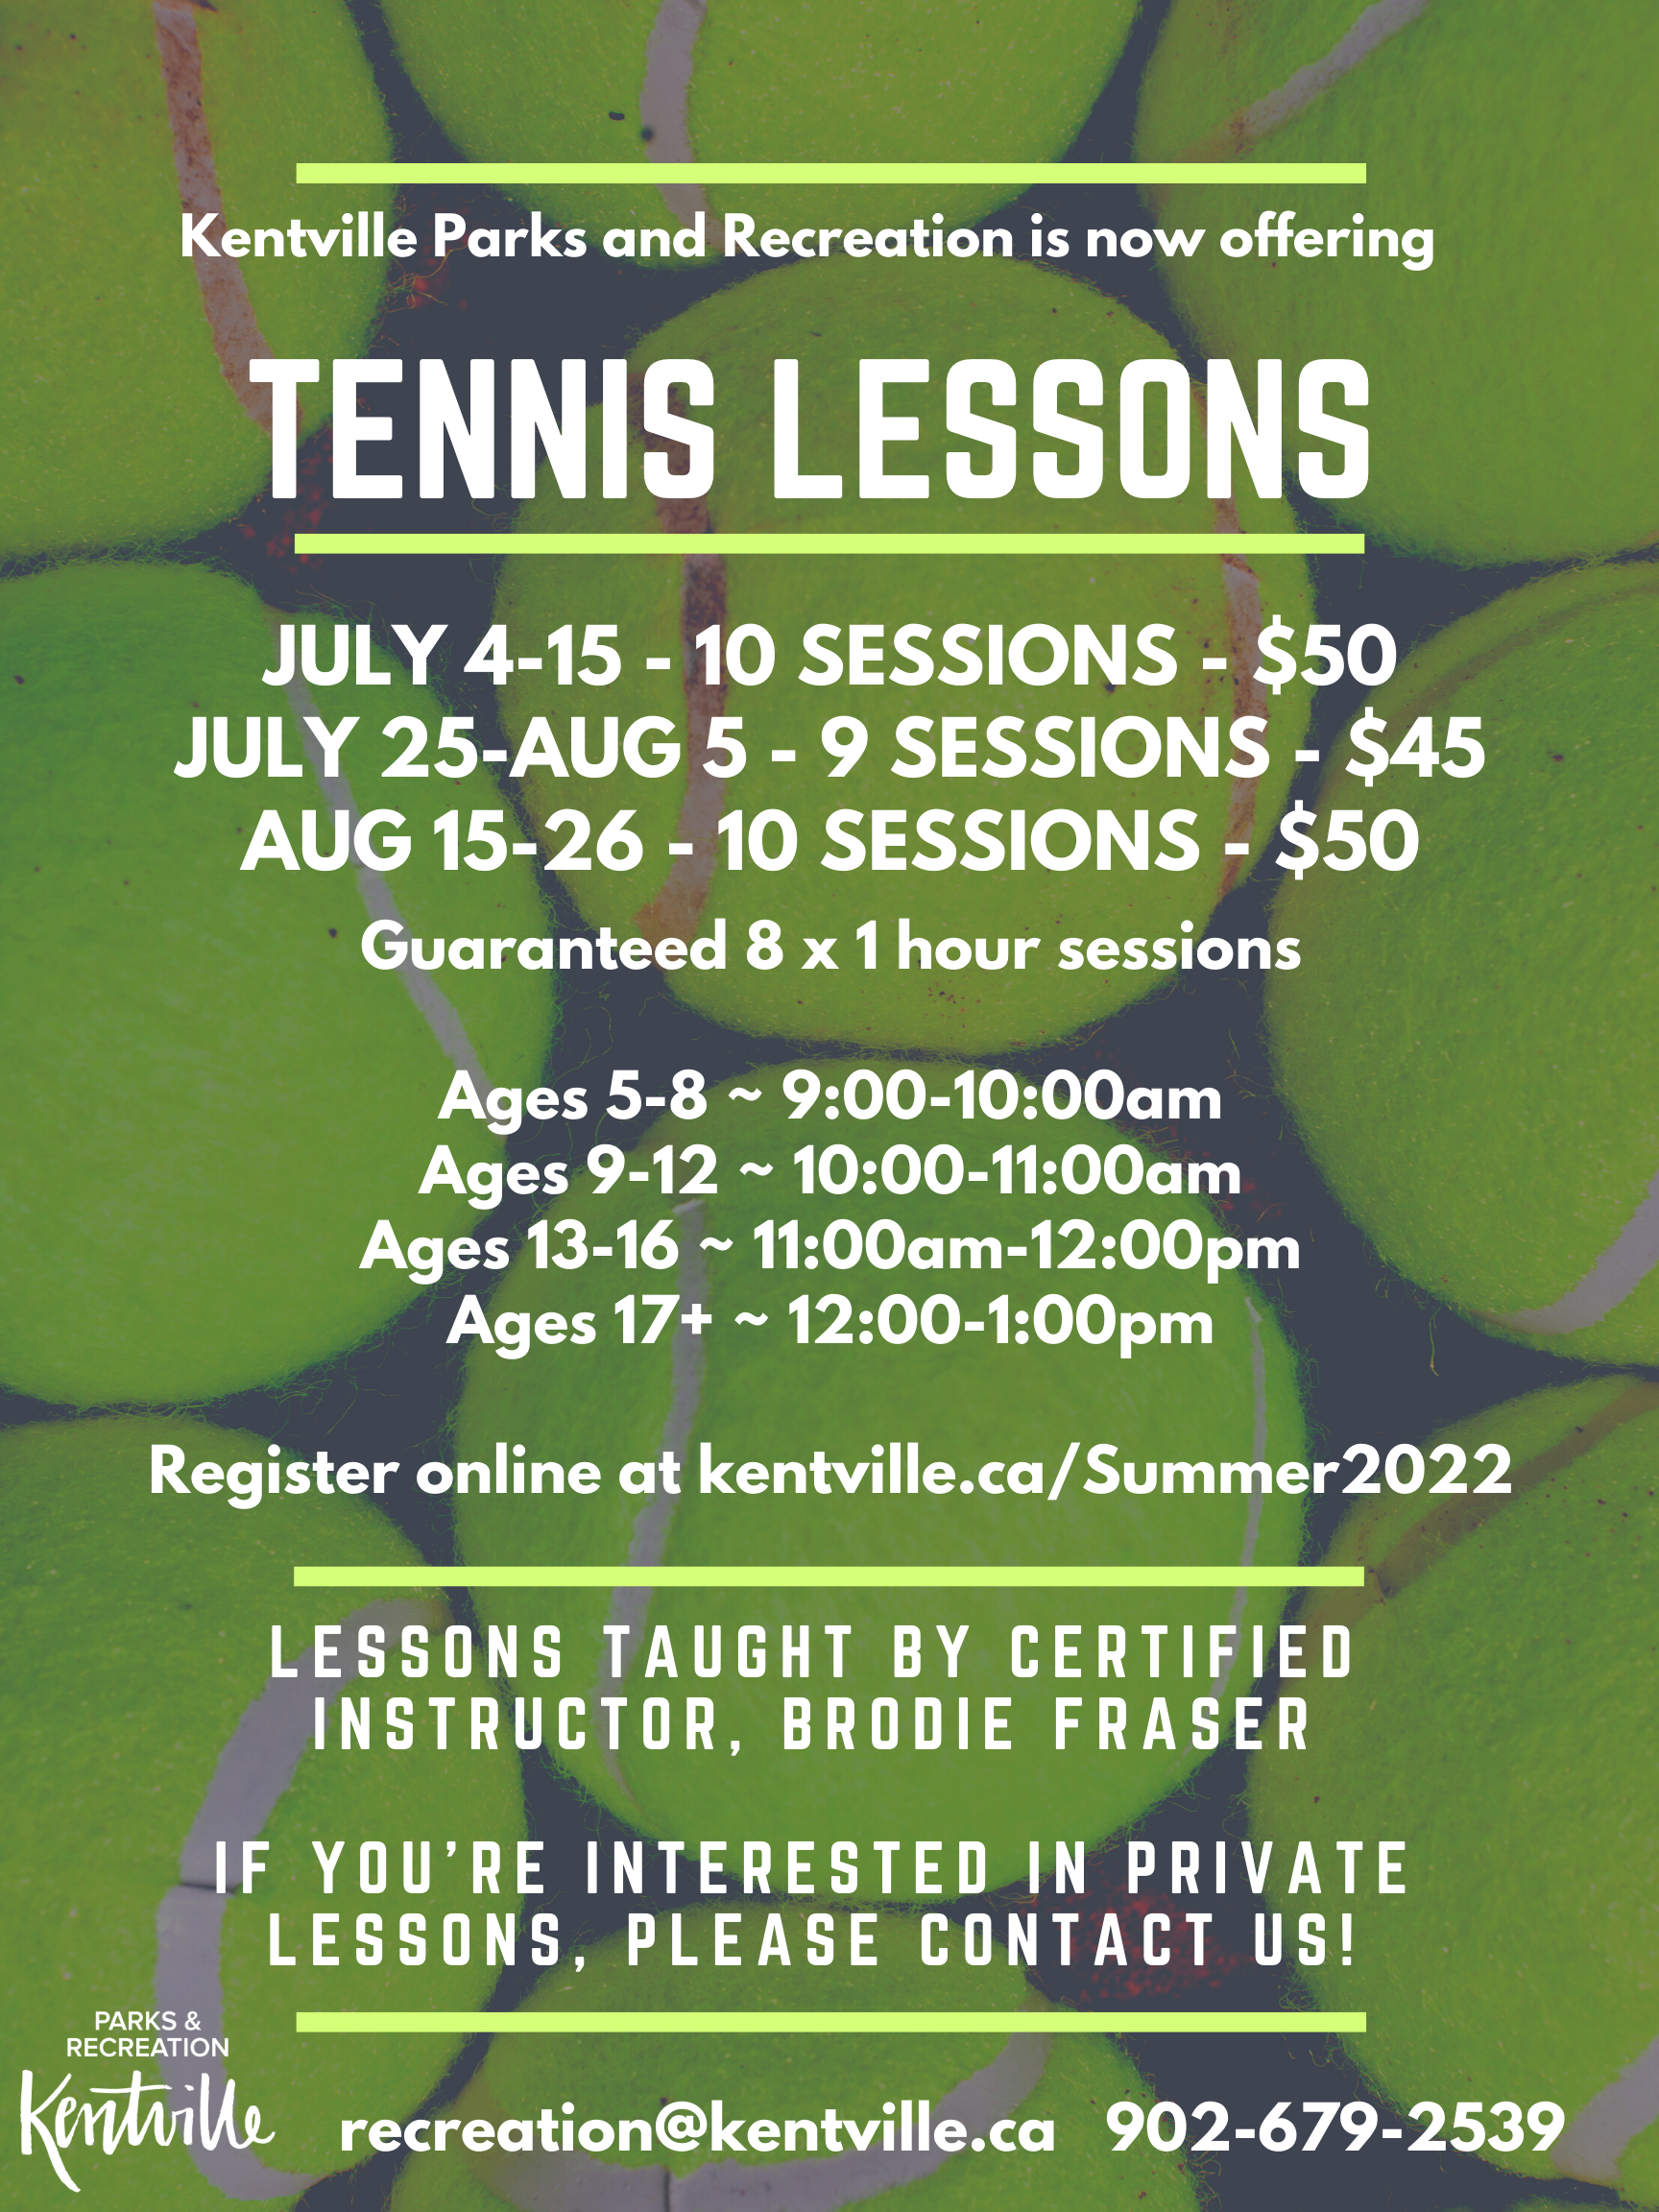 Tennis lessons are now available at the Kentville Tennis/Pickleball courts for ages 5 and up! Cost is $50 for a 2 week session, 1 hour daily! Call 902-679-259 for more information. 